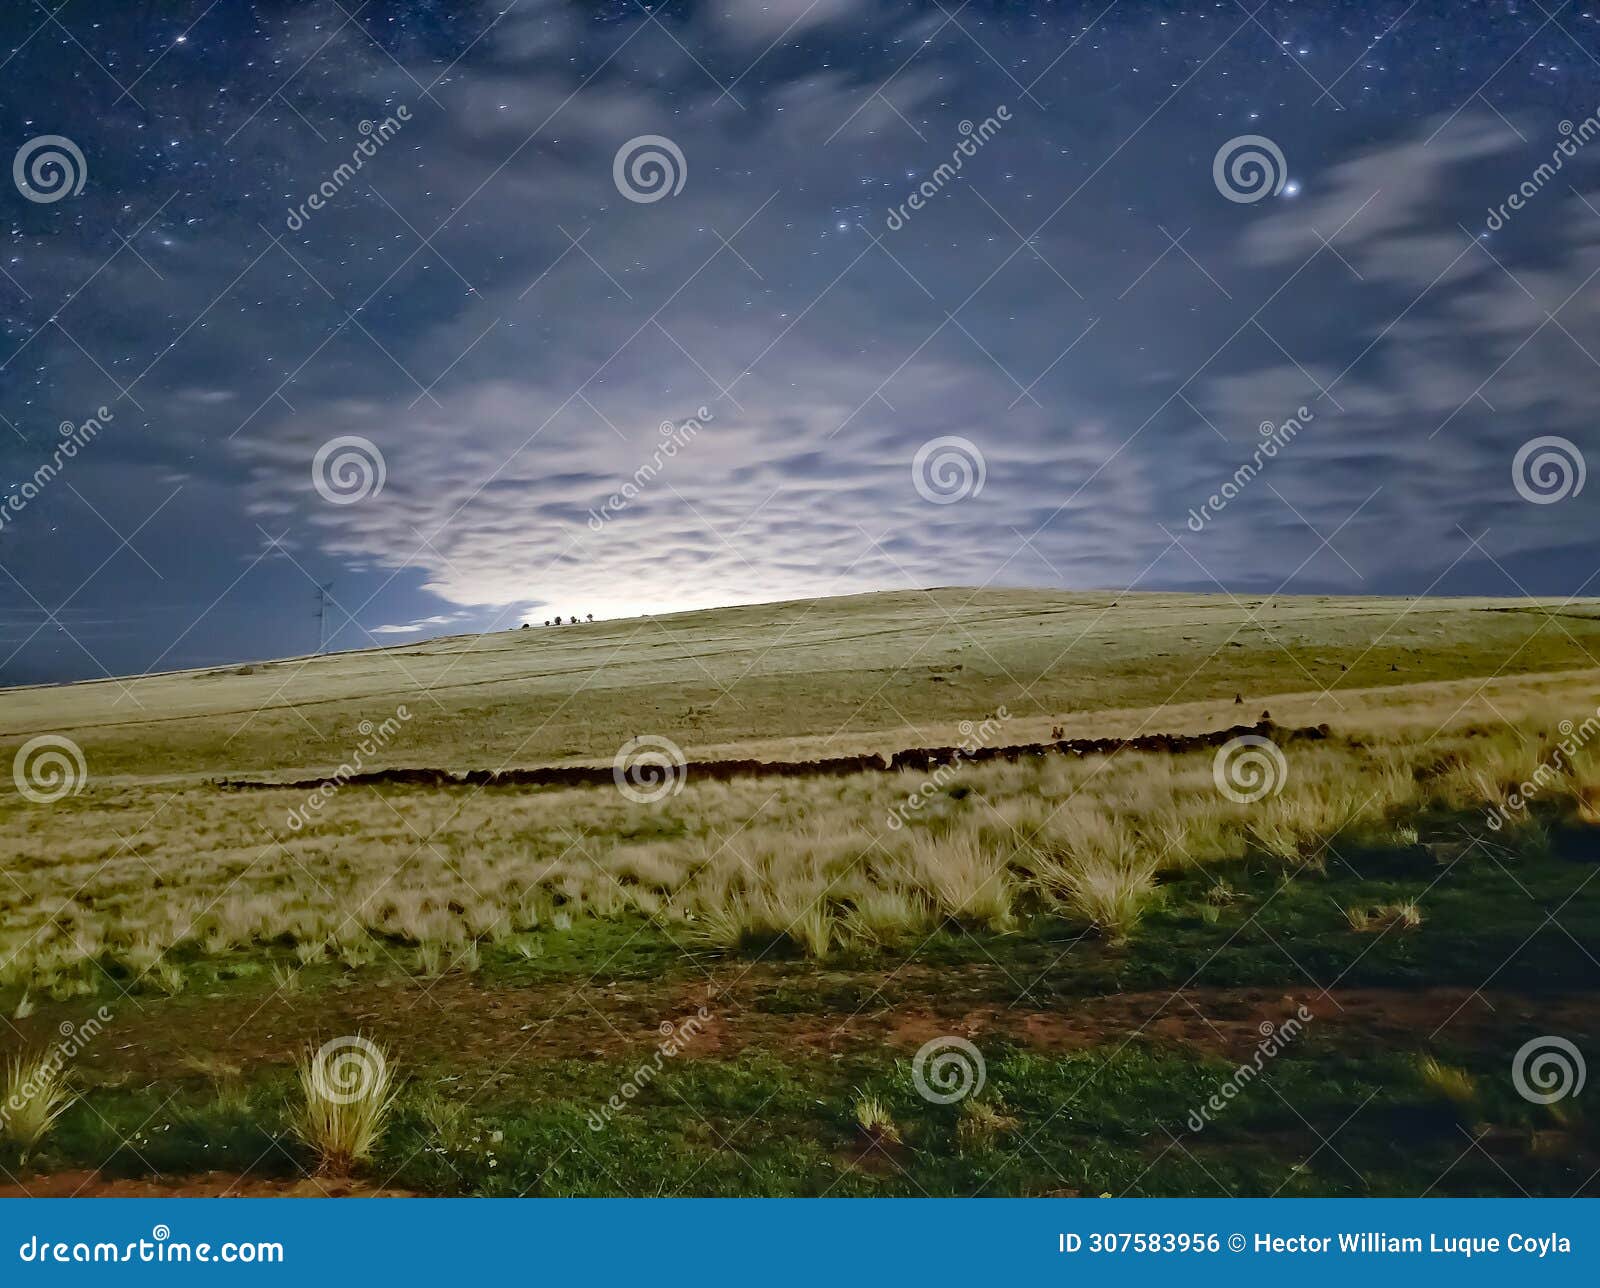 landscape under the moonlight with clouds and stars